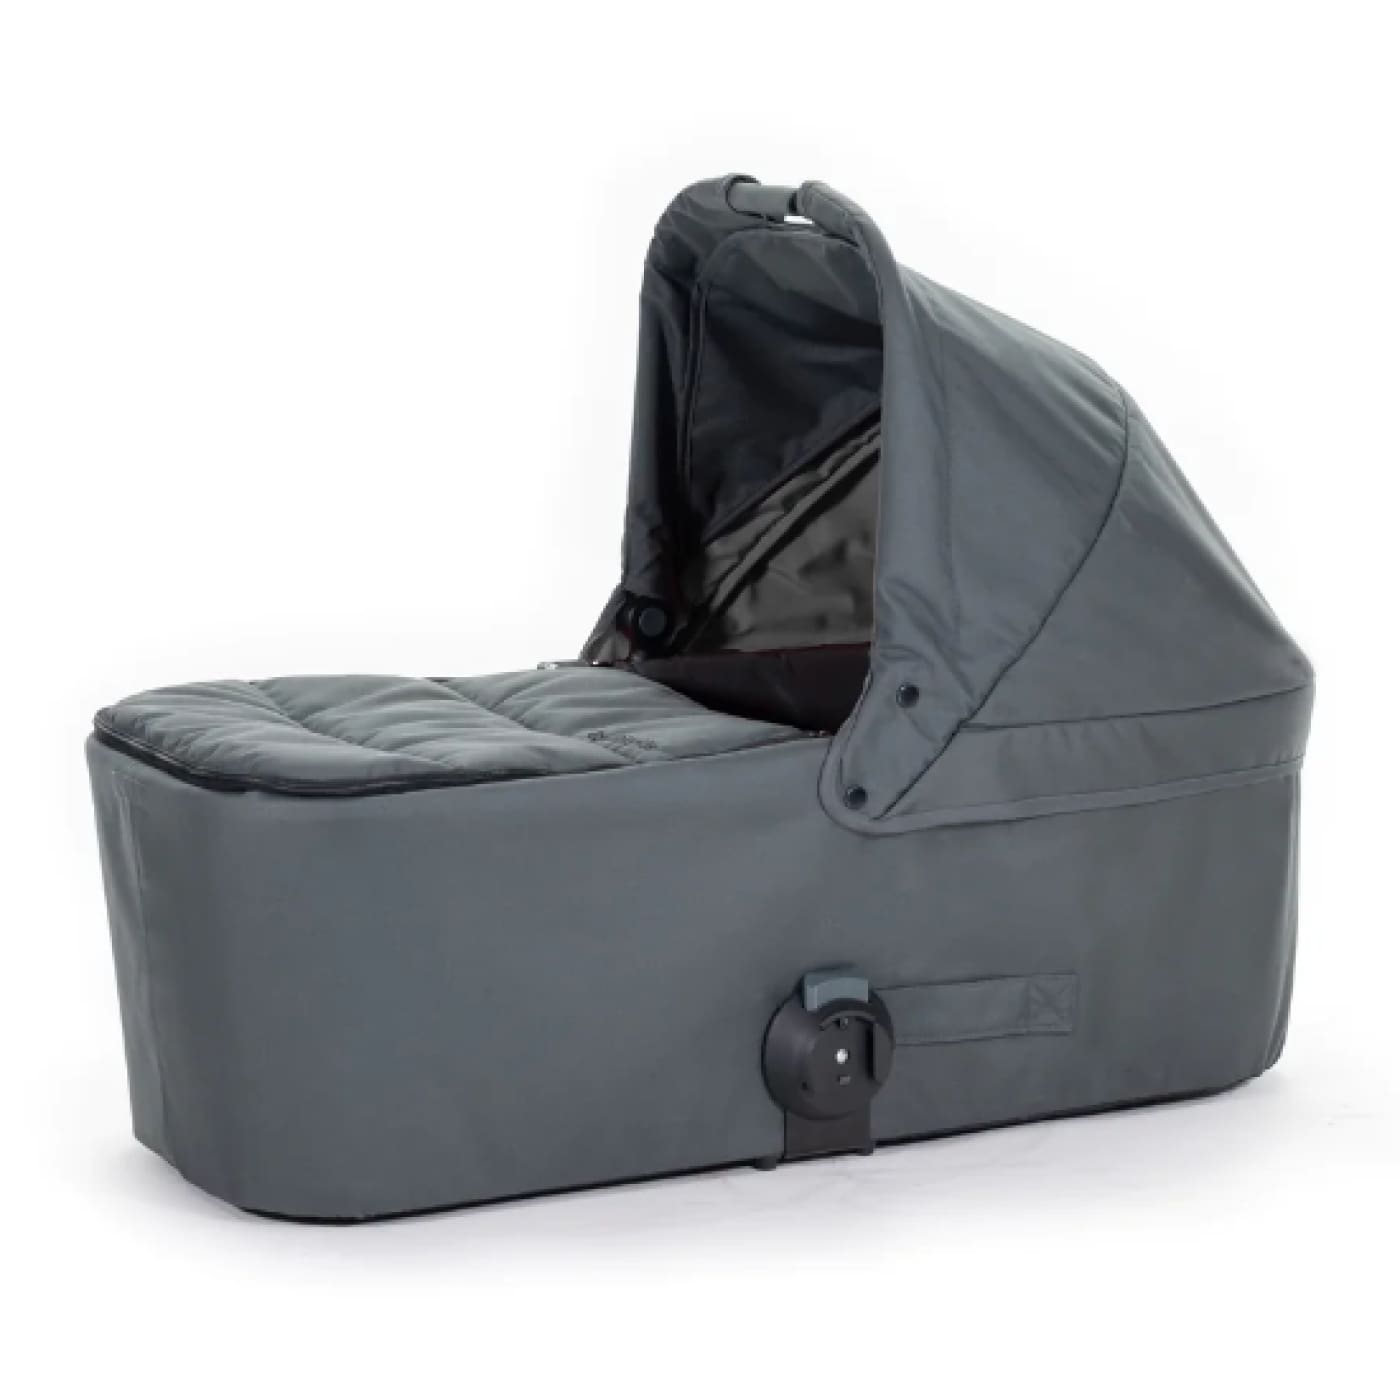 Bumbleride Pram Single Bassinet Carrycot - Black - PRAMS & STROLLERS - BASS/CARRY COTS/STANDS